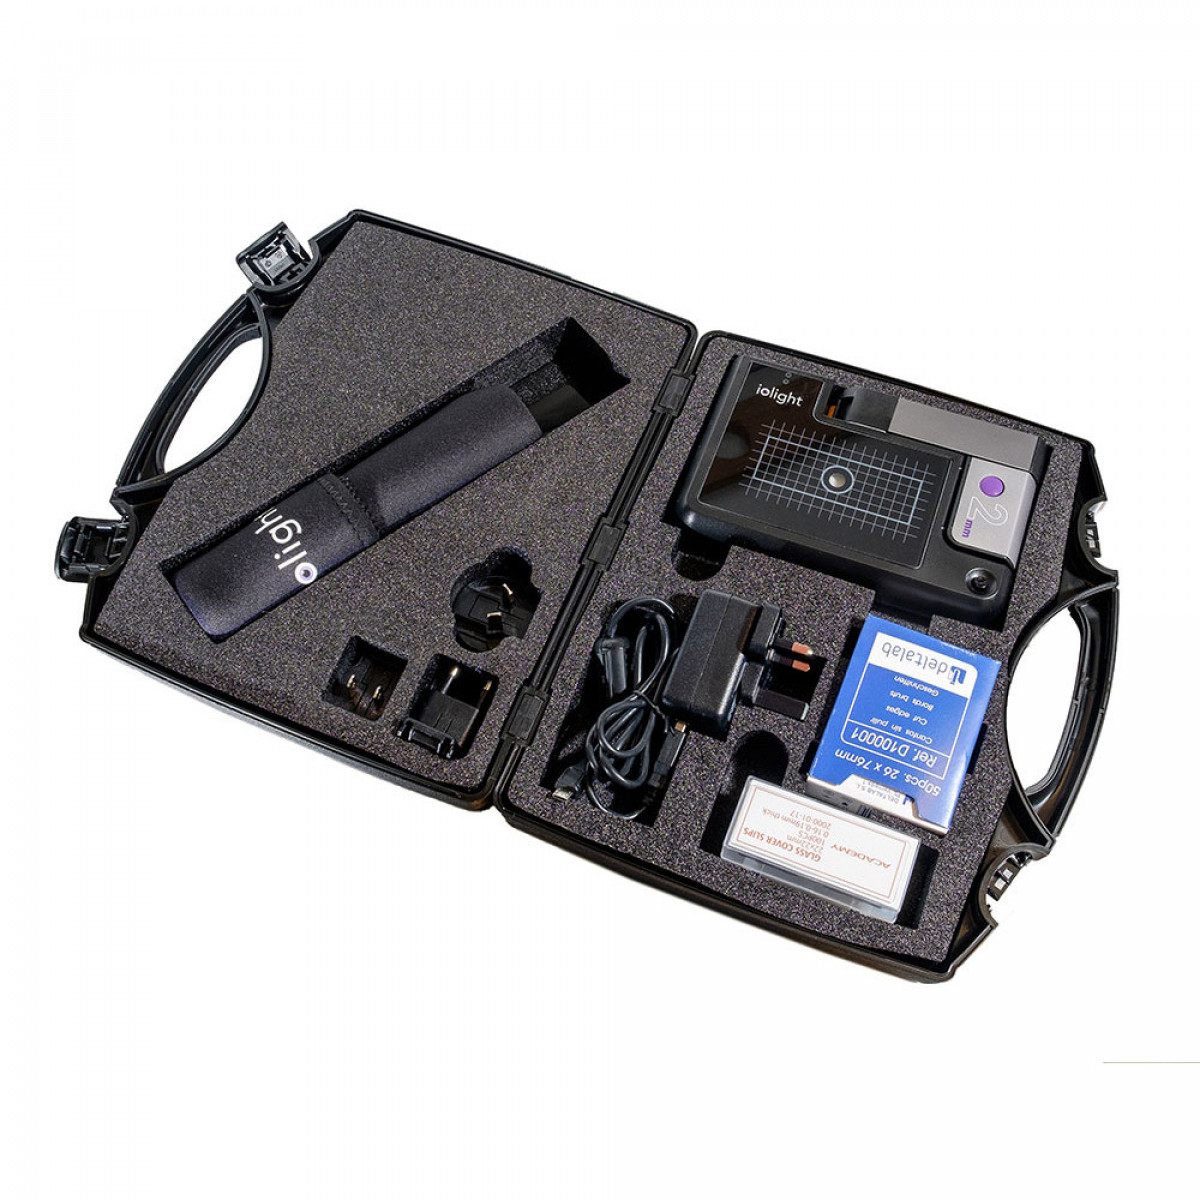 ioLight case shown with microscope, pouch and charger (not included)